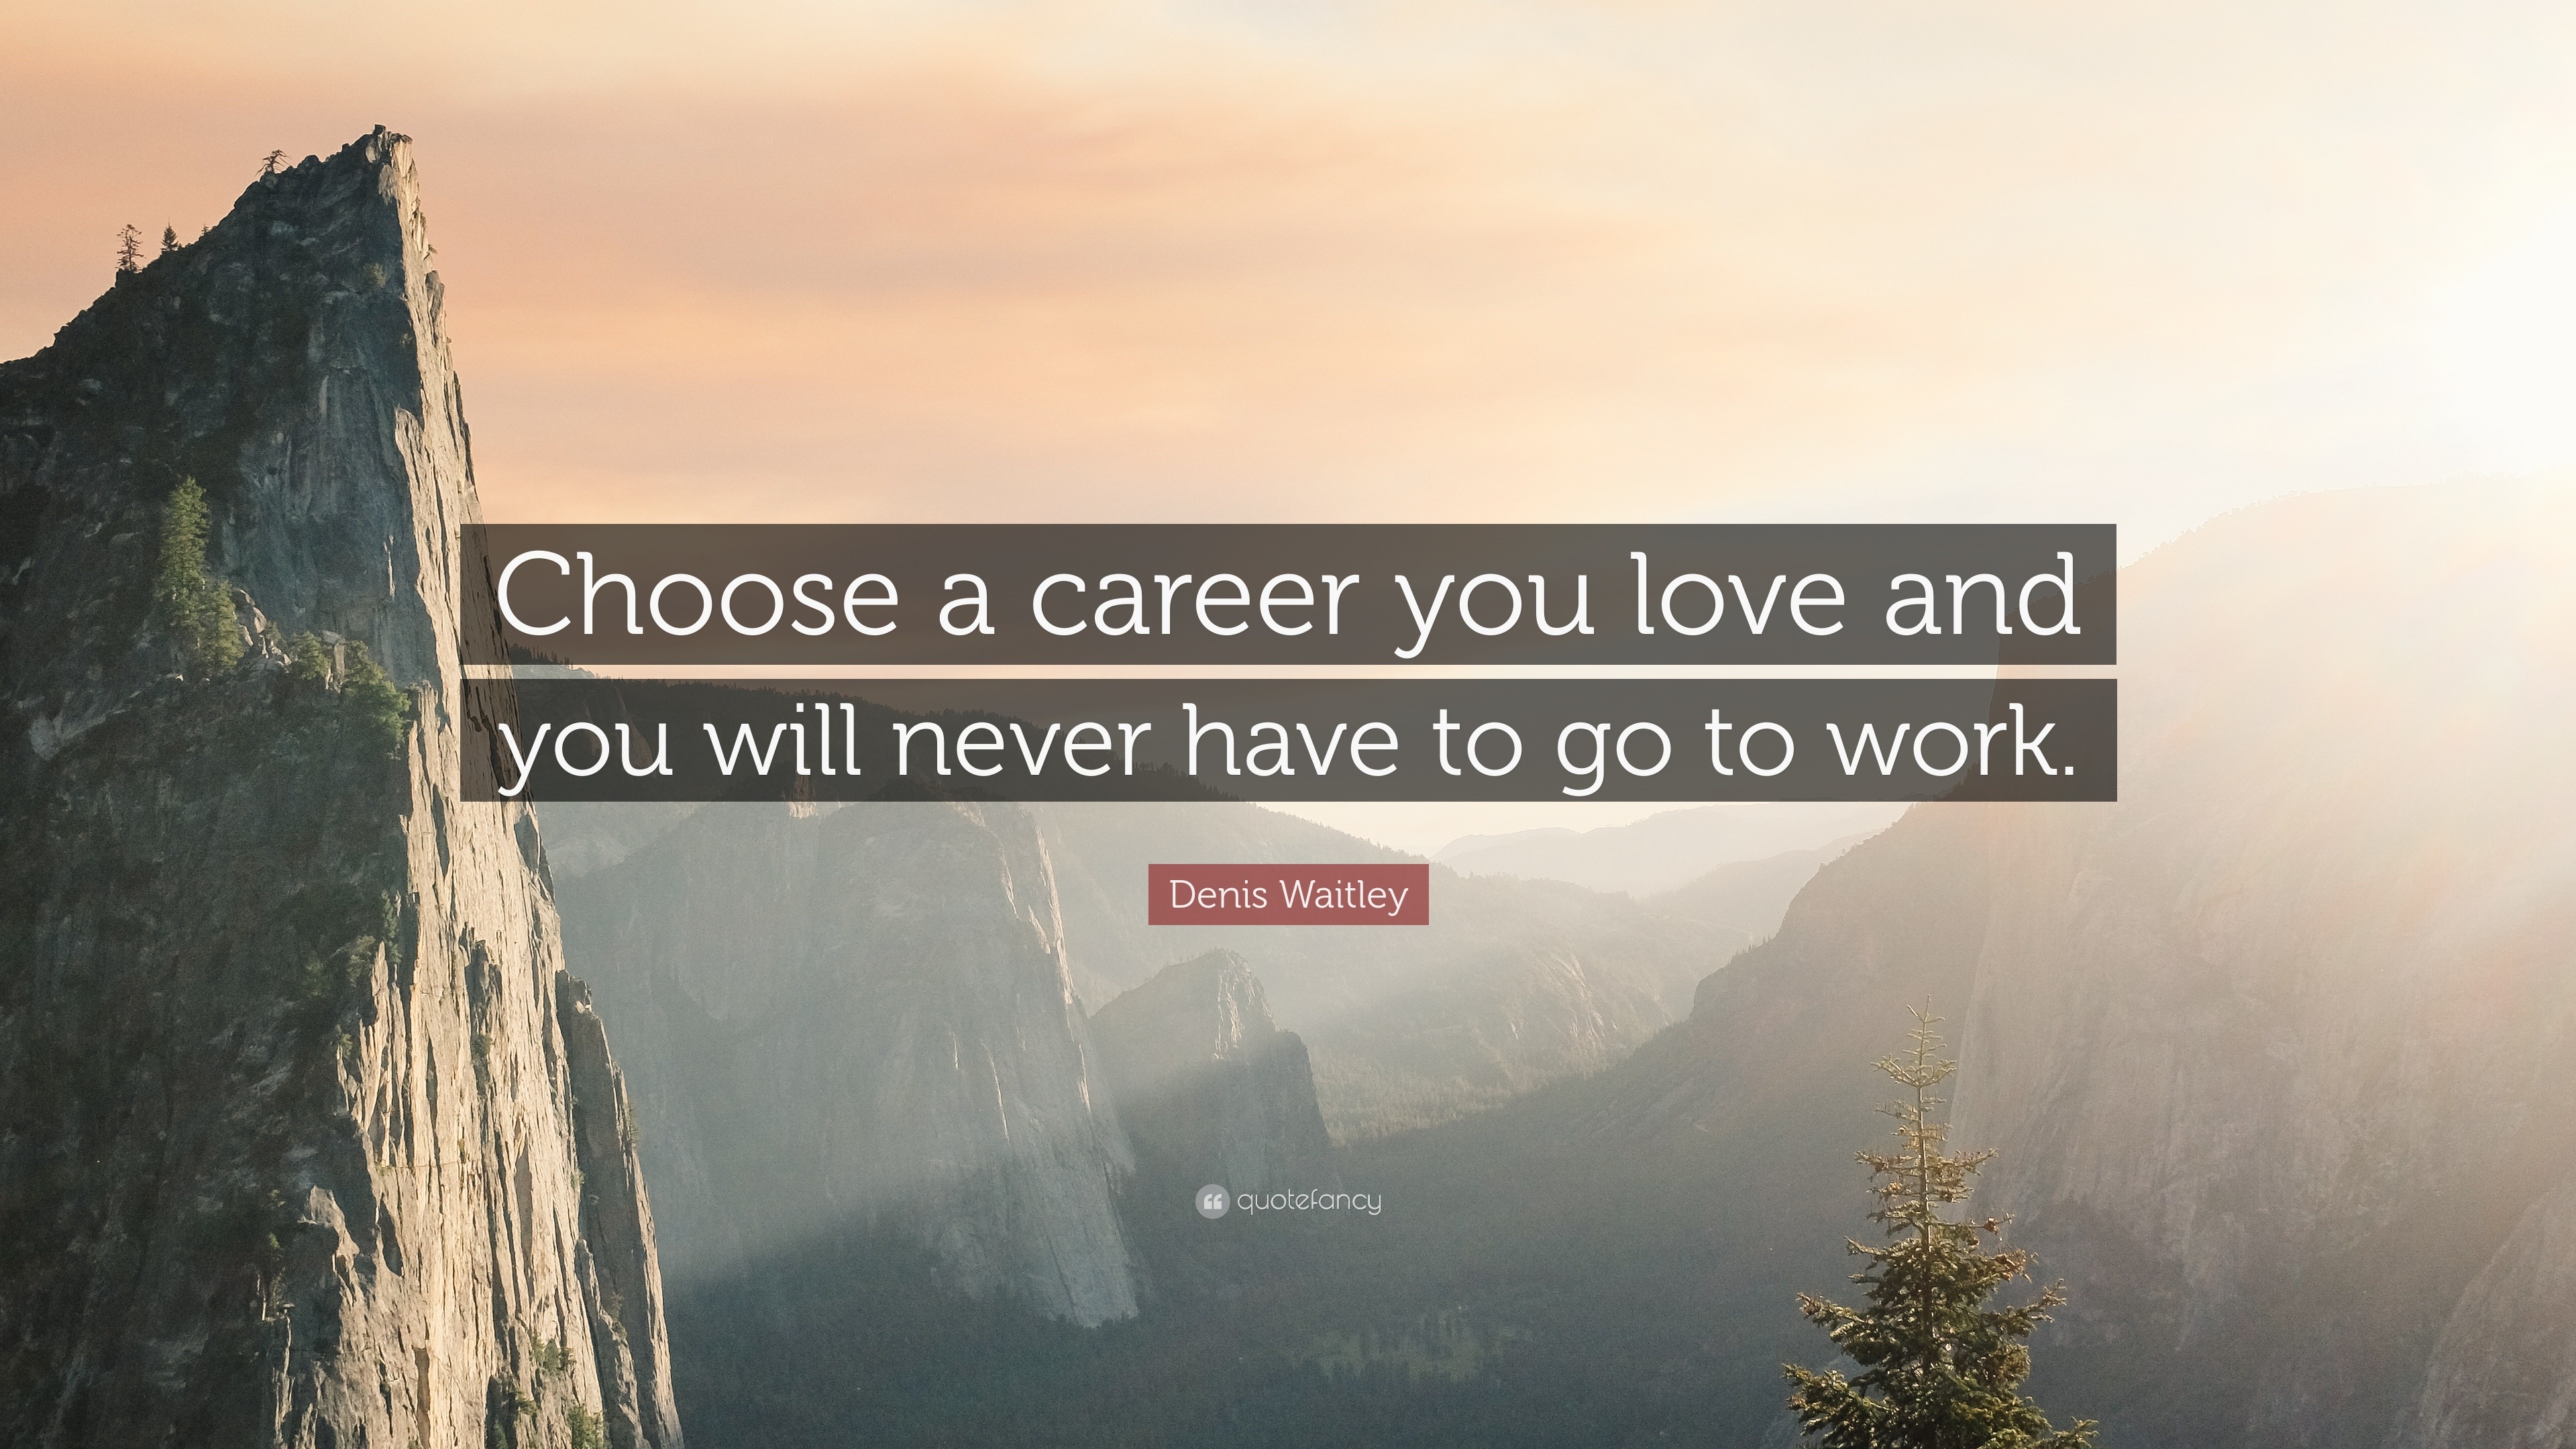 Quotes About Careers (40 wallpapers) - Quotefancy